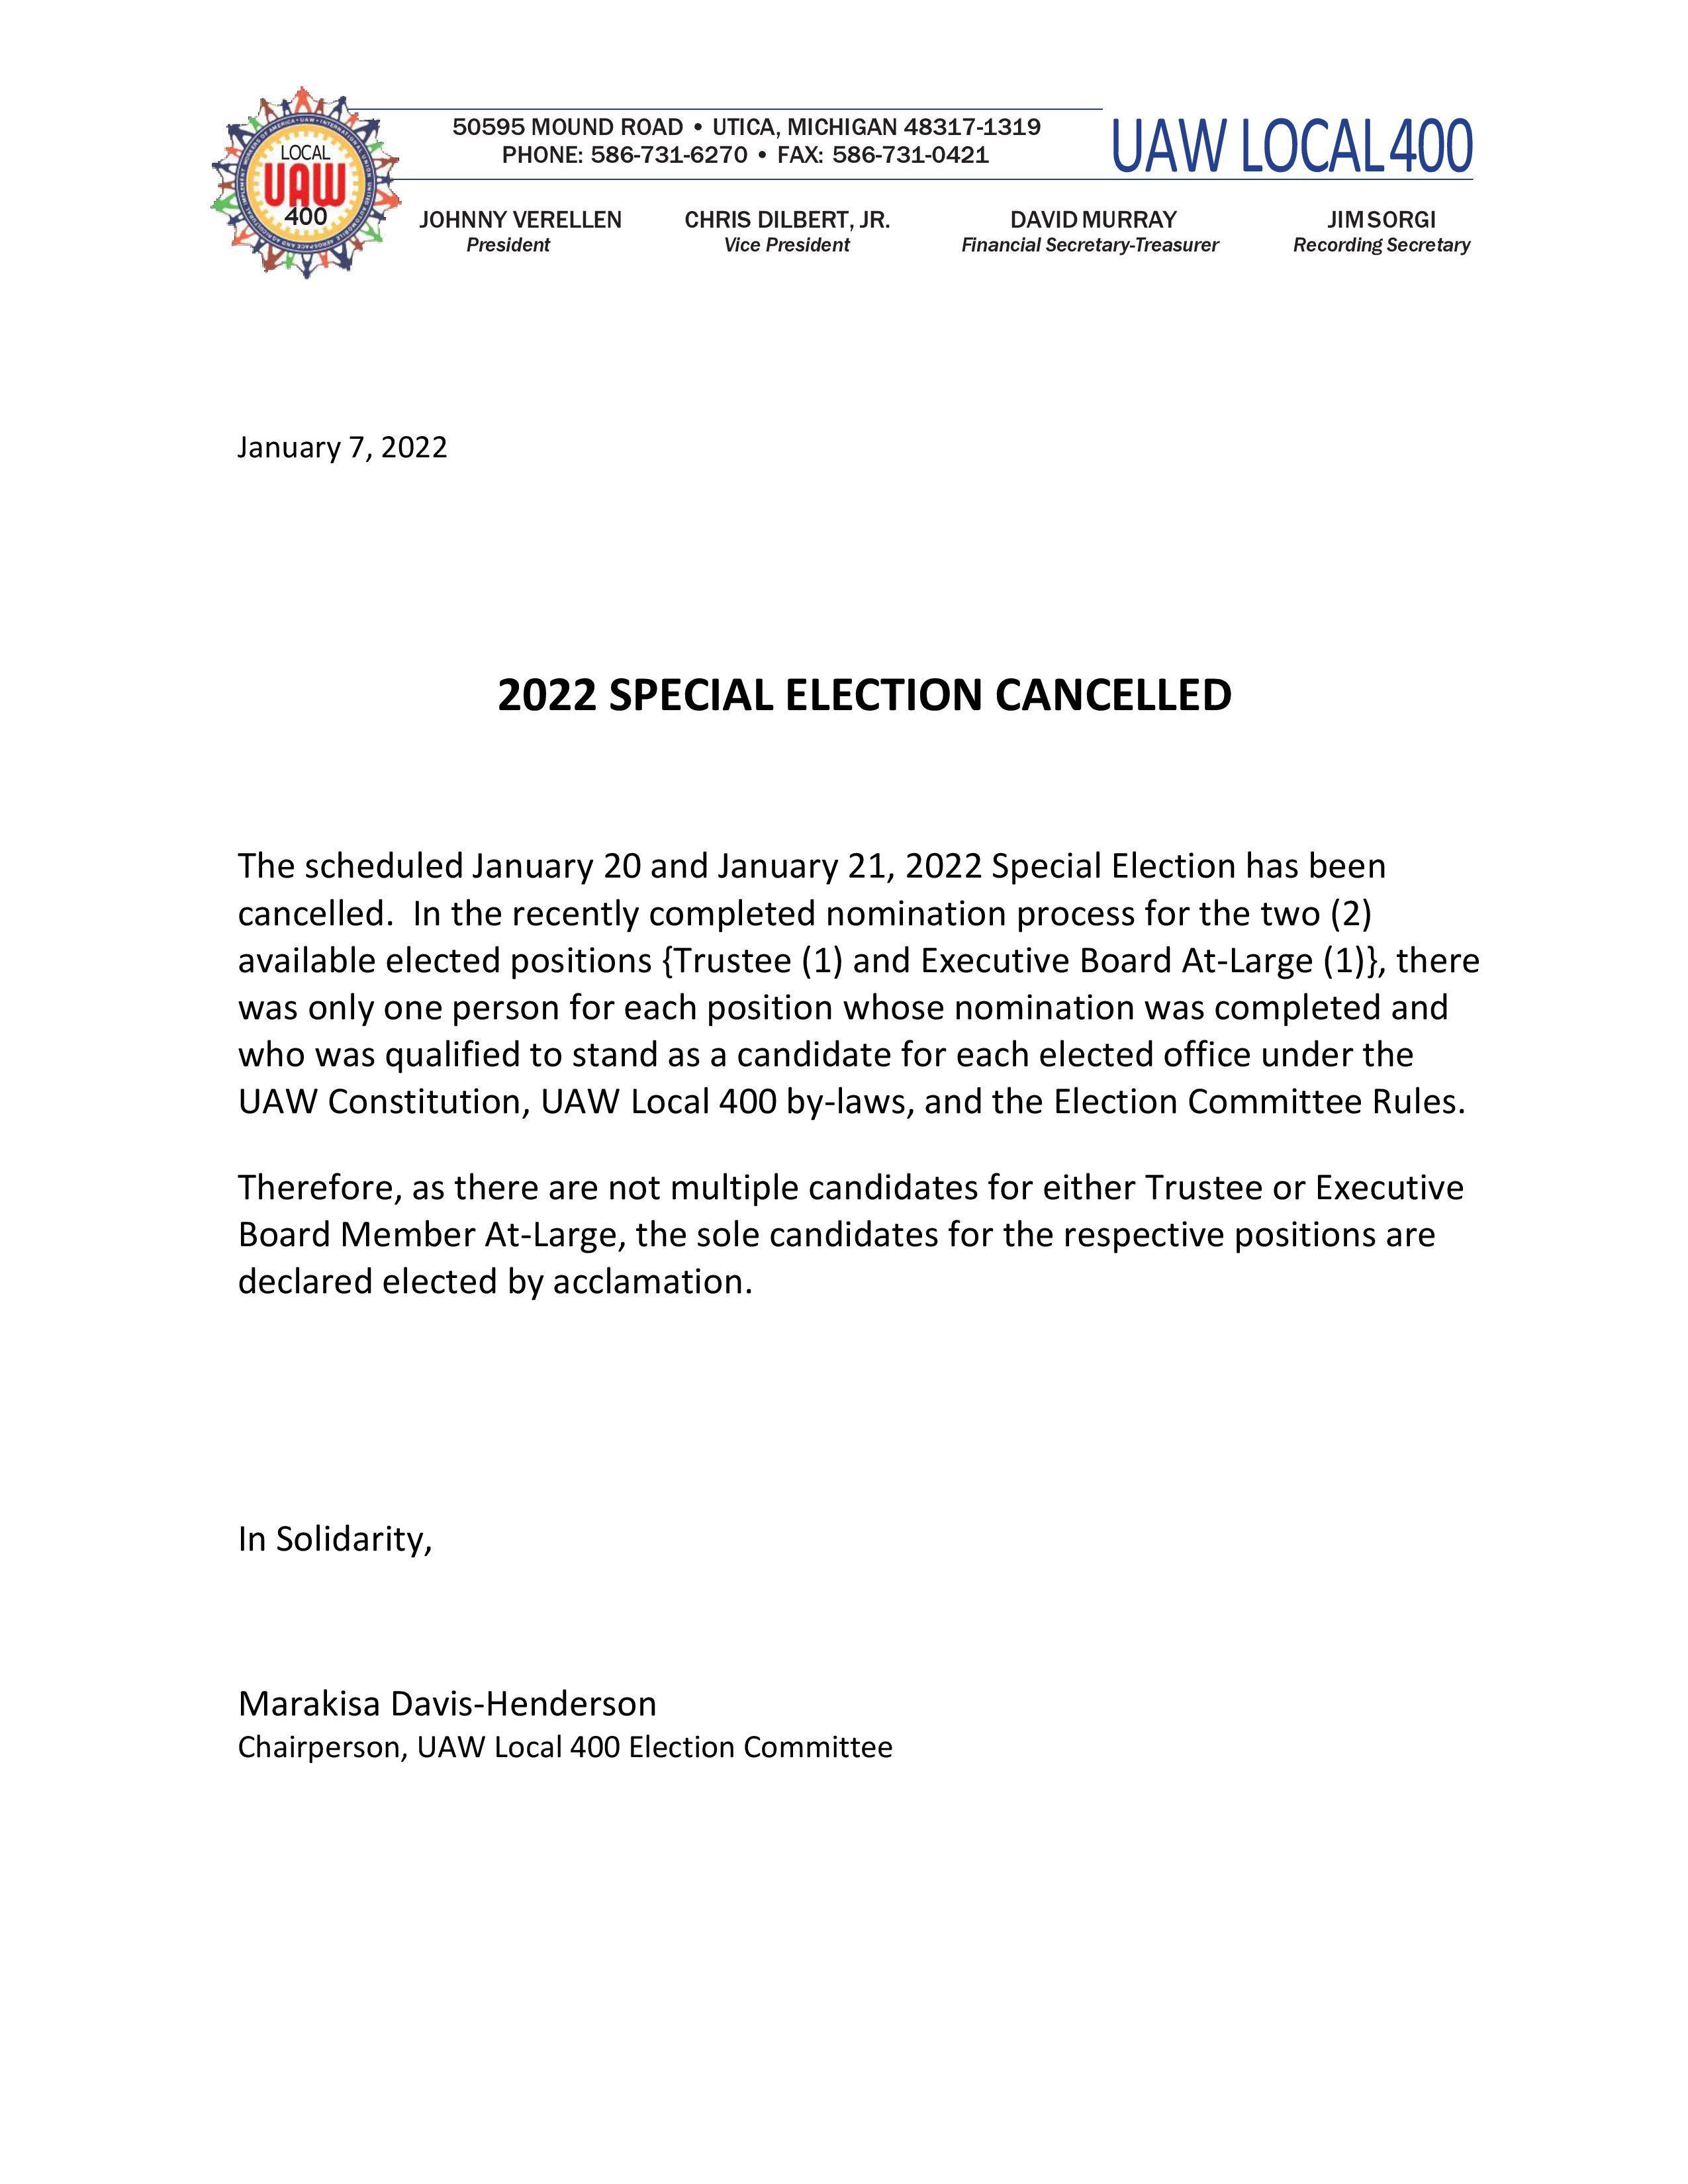 2022 Special Election Cancelled